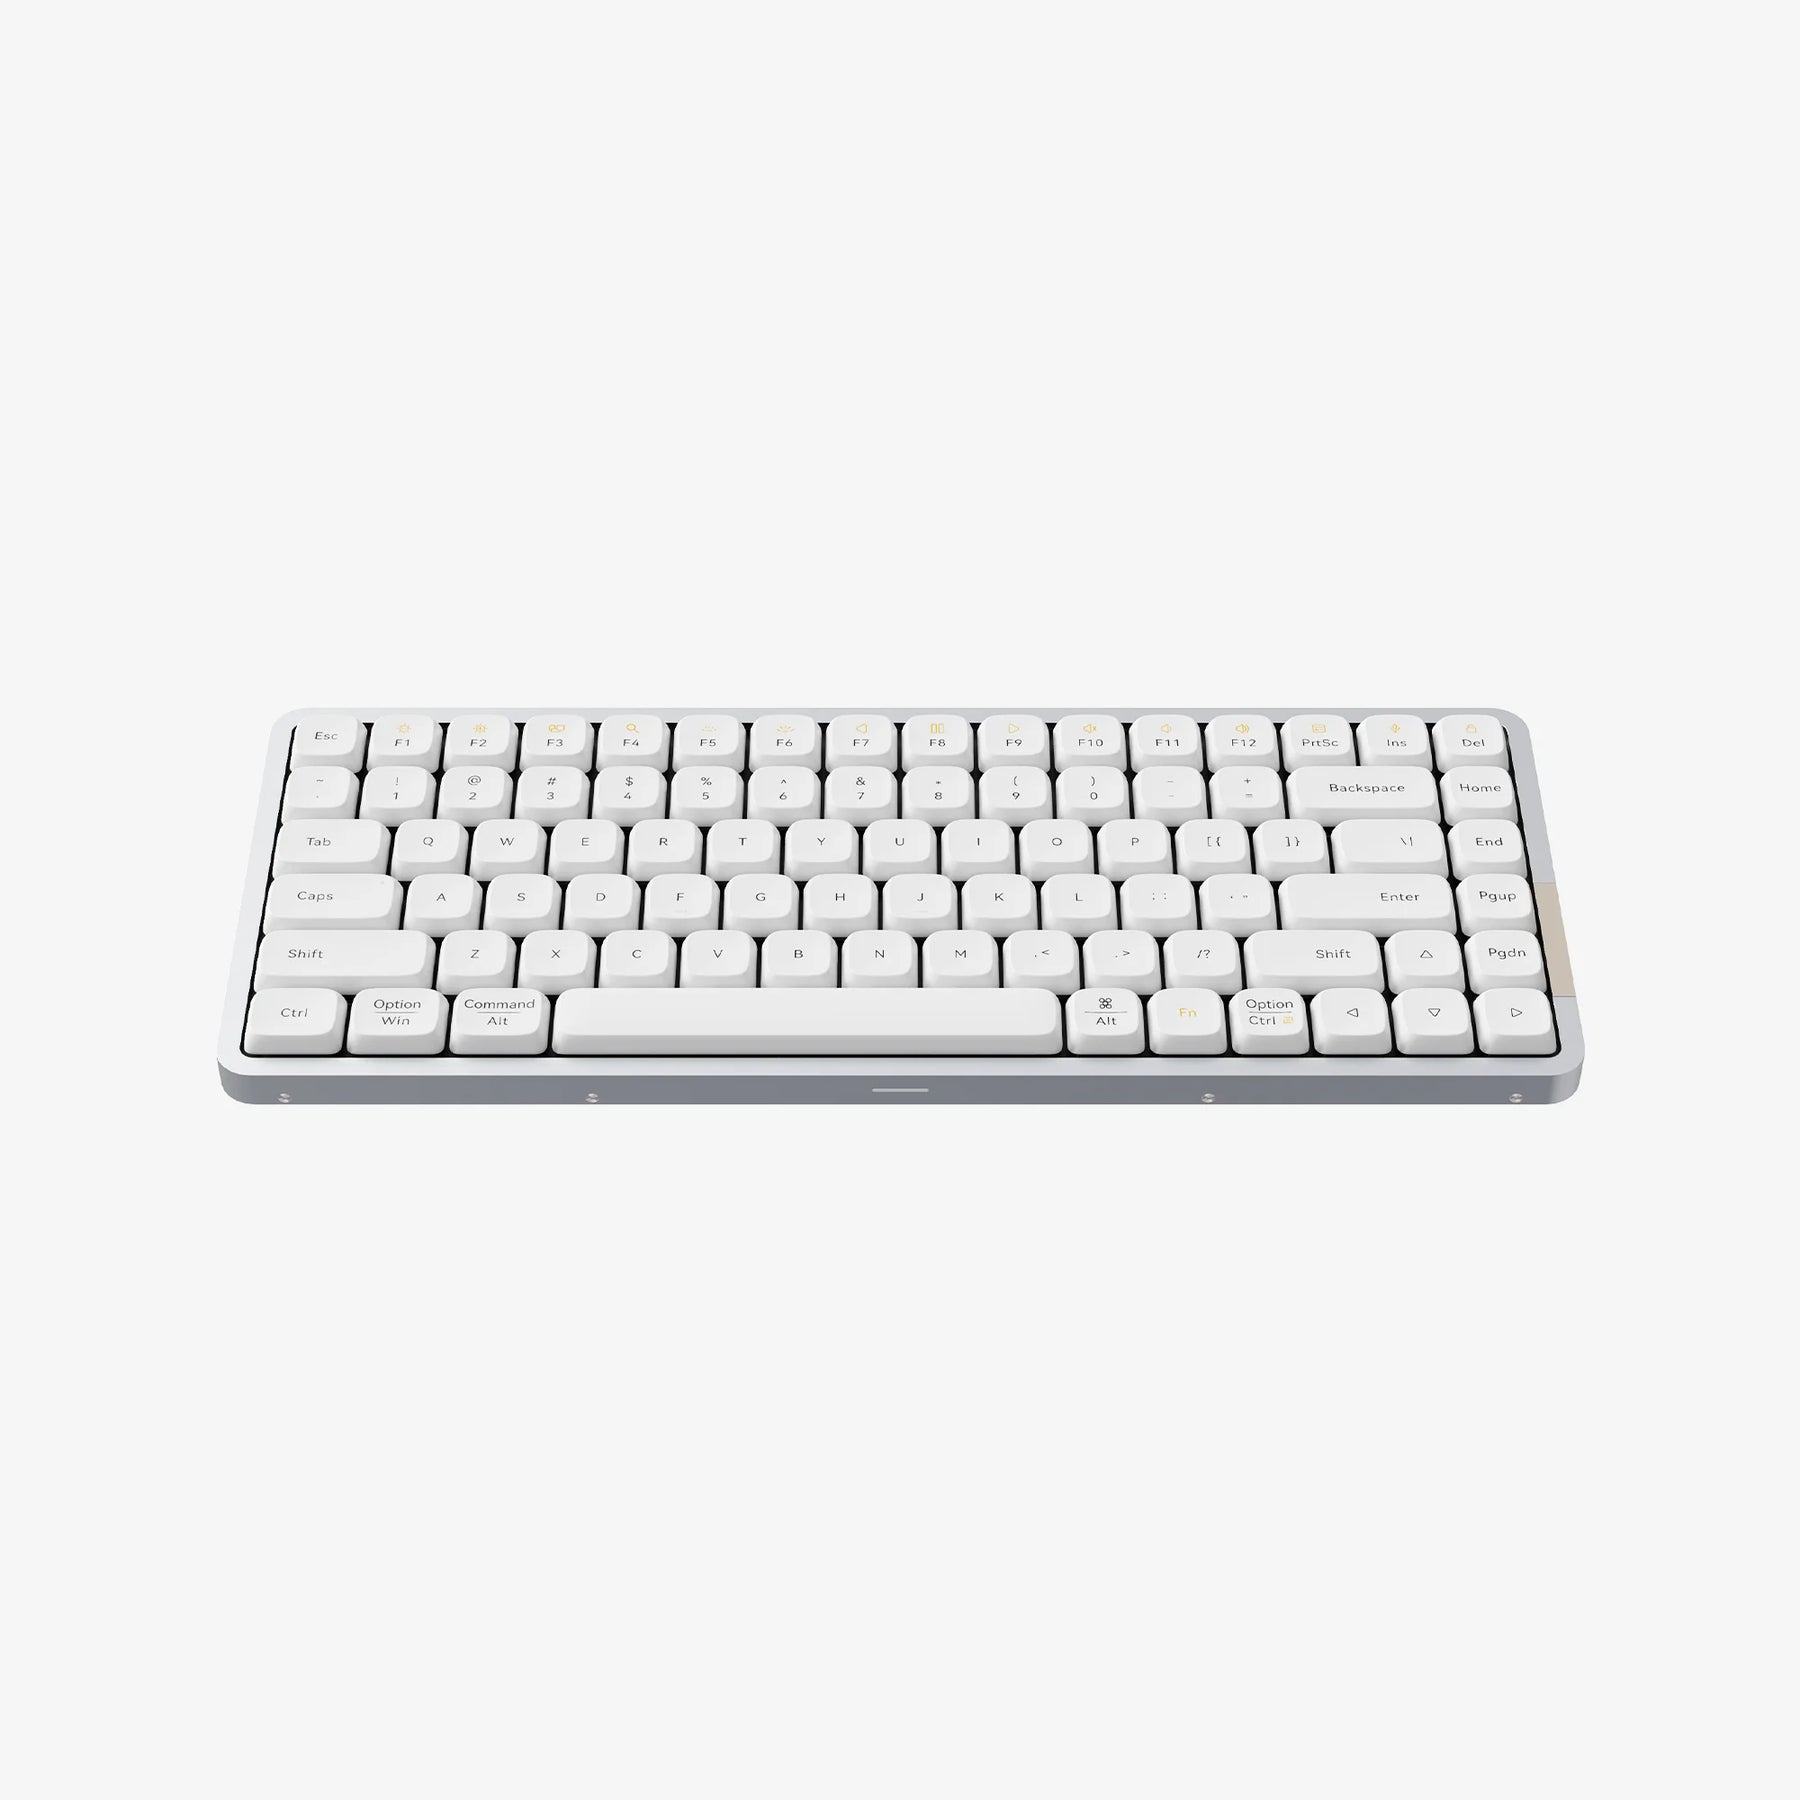 LOFREE FLOW, the Smoothest Mechanical Keyboard